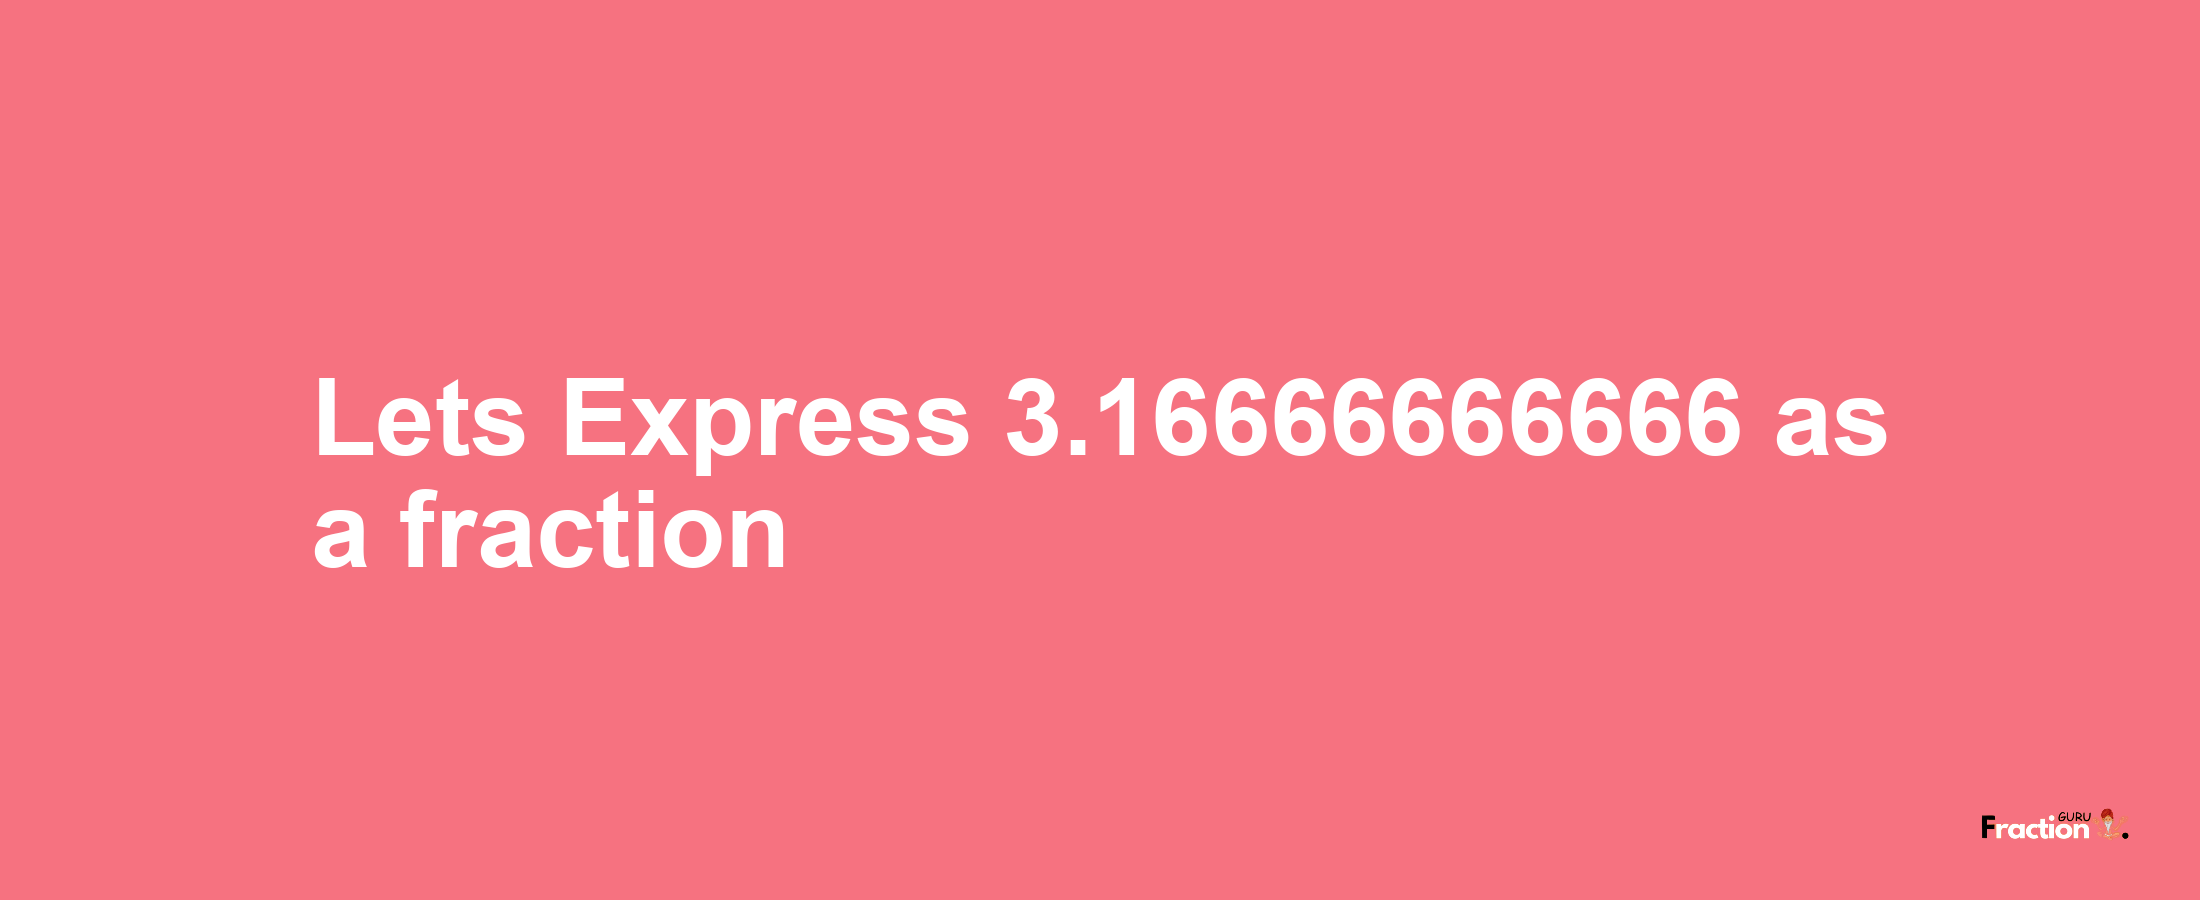 Lets Express 3.16666666666 as afraction